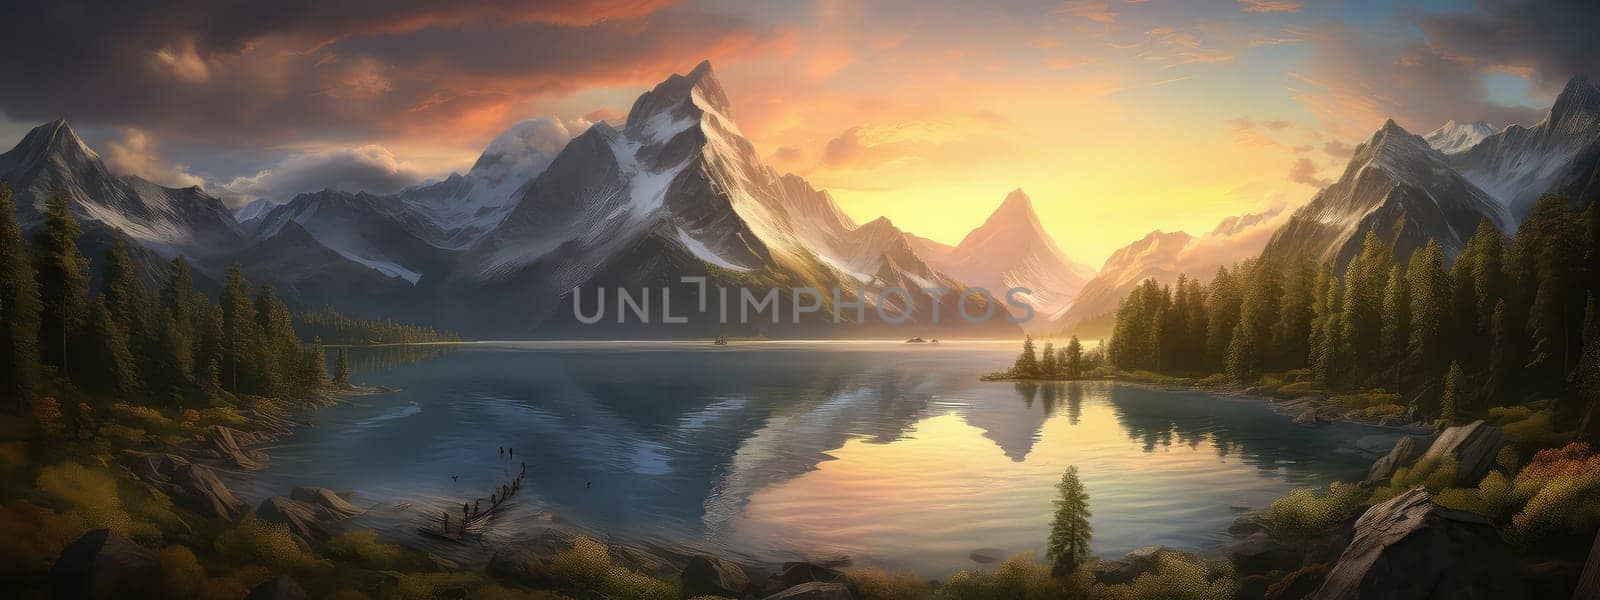 Encounter the untouched beauty photo realistic illustration - Generative AI. Snowy, mountain, lake, sunset, pines.